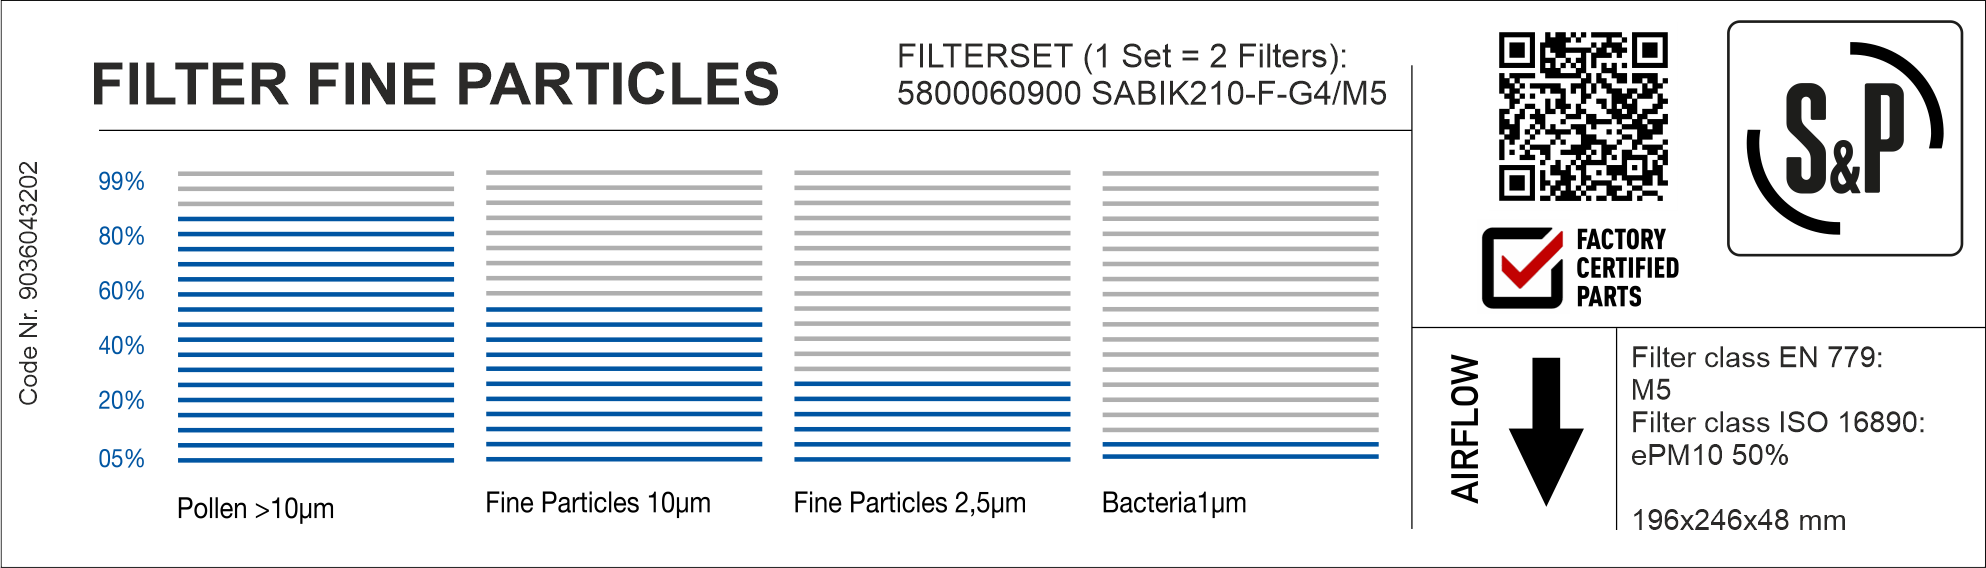 FILTER FINE PARTICLES_2022